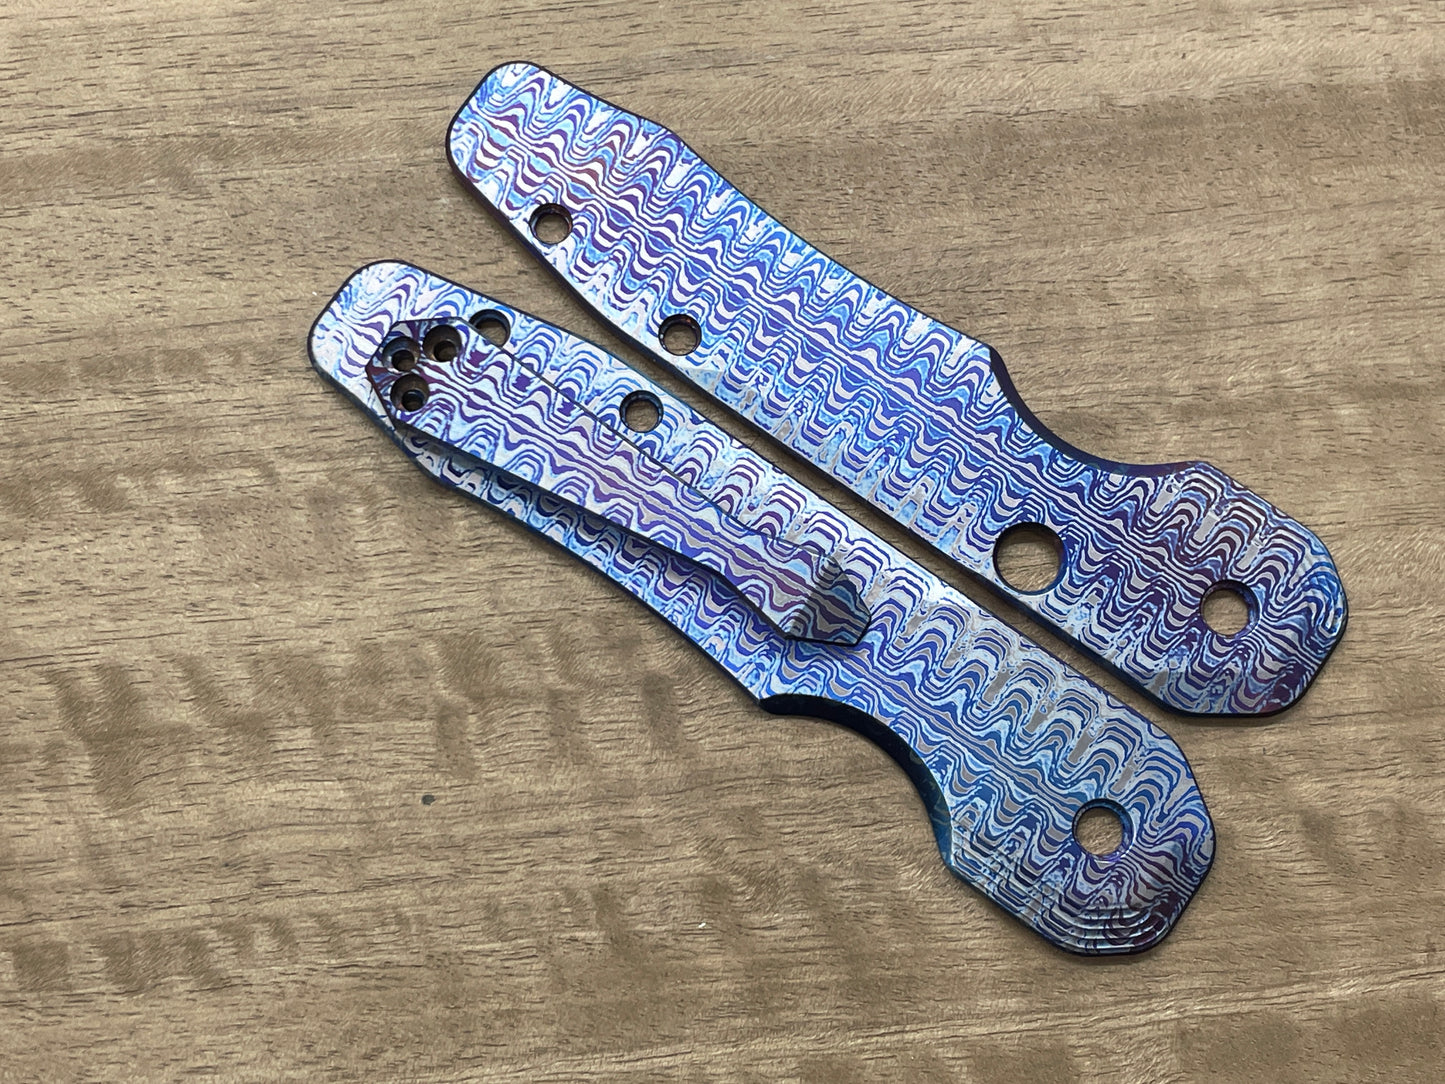 RIPPLE Flamed Dmd Titanium CLIP for most Spyderco models